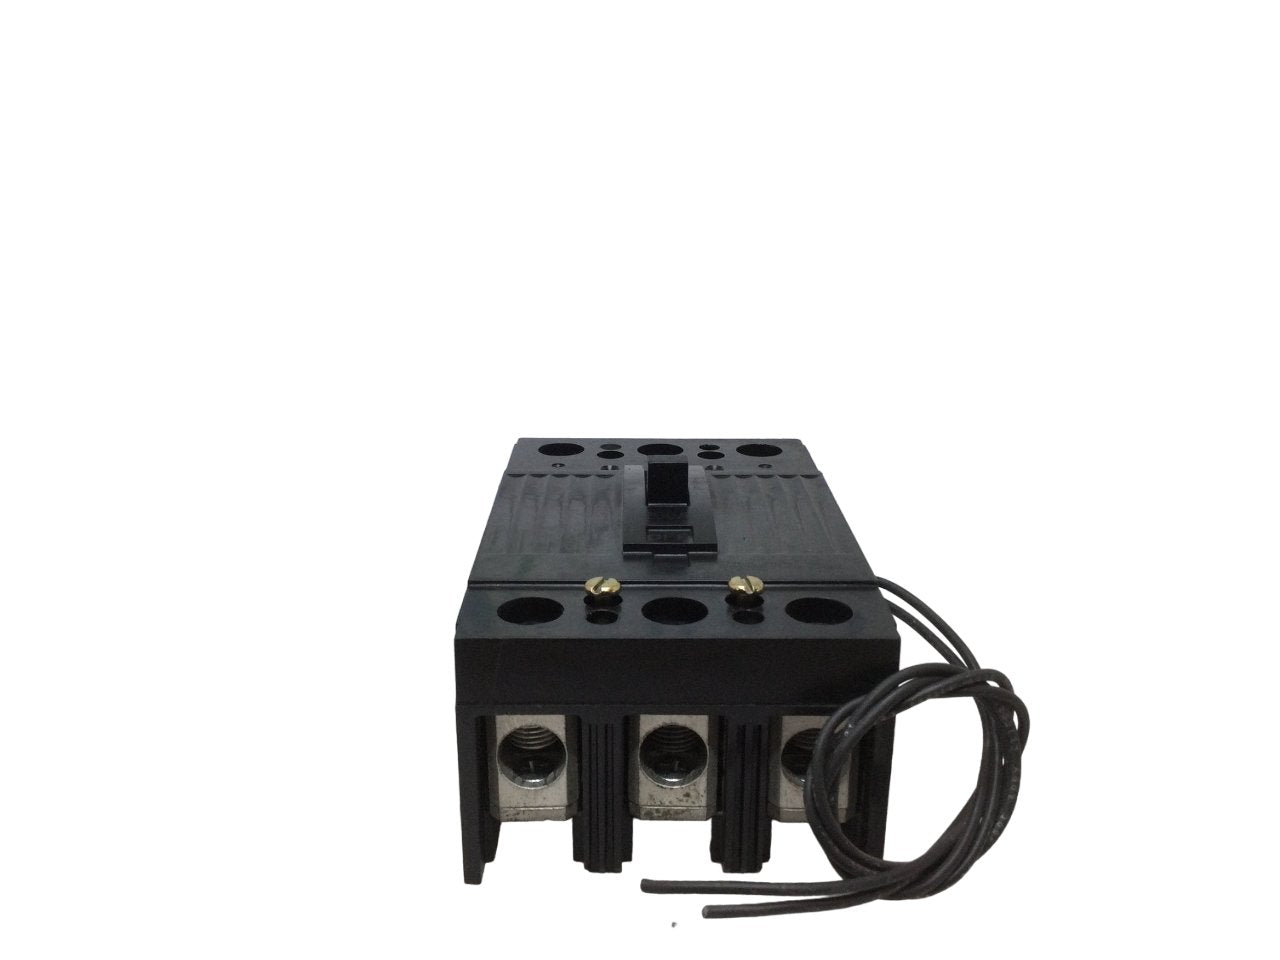 THQD32150ST1 - General Electrics - Molded Case Circuit Breakers